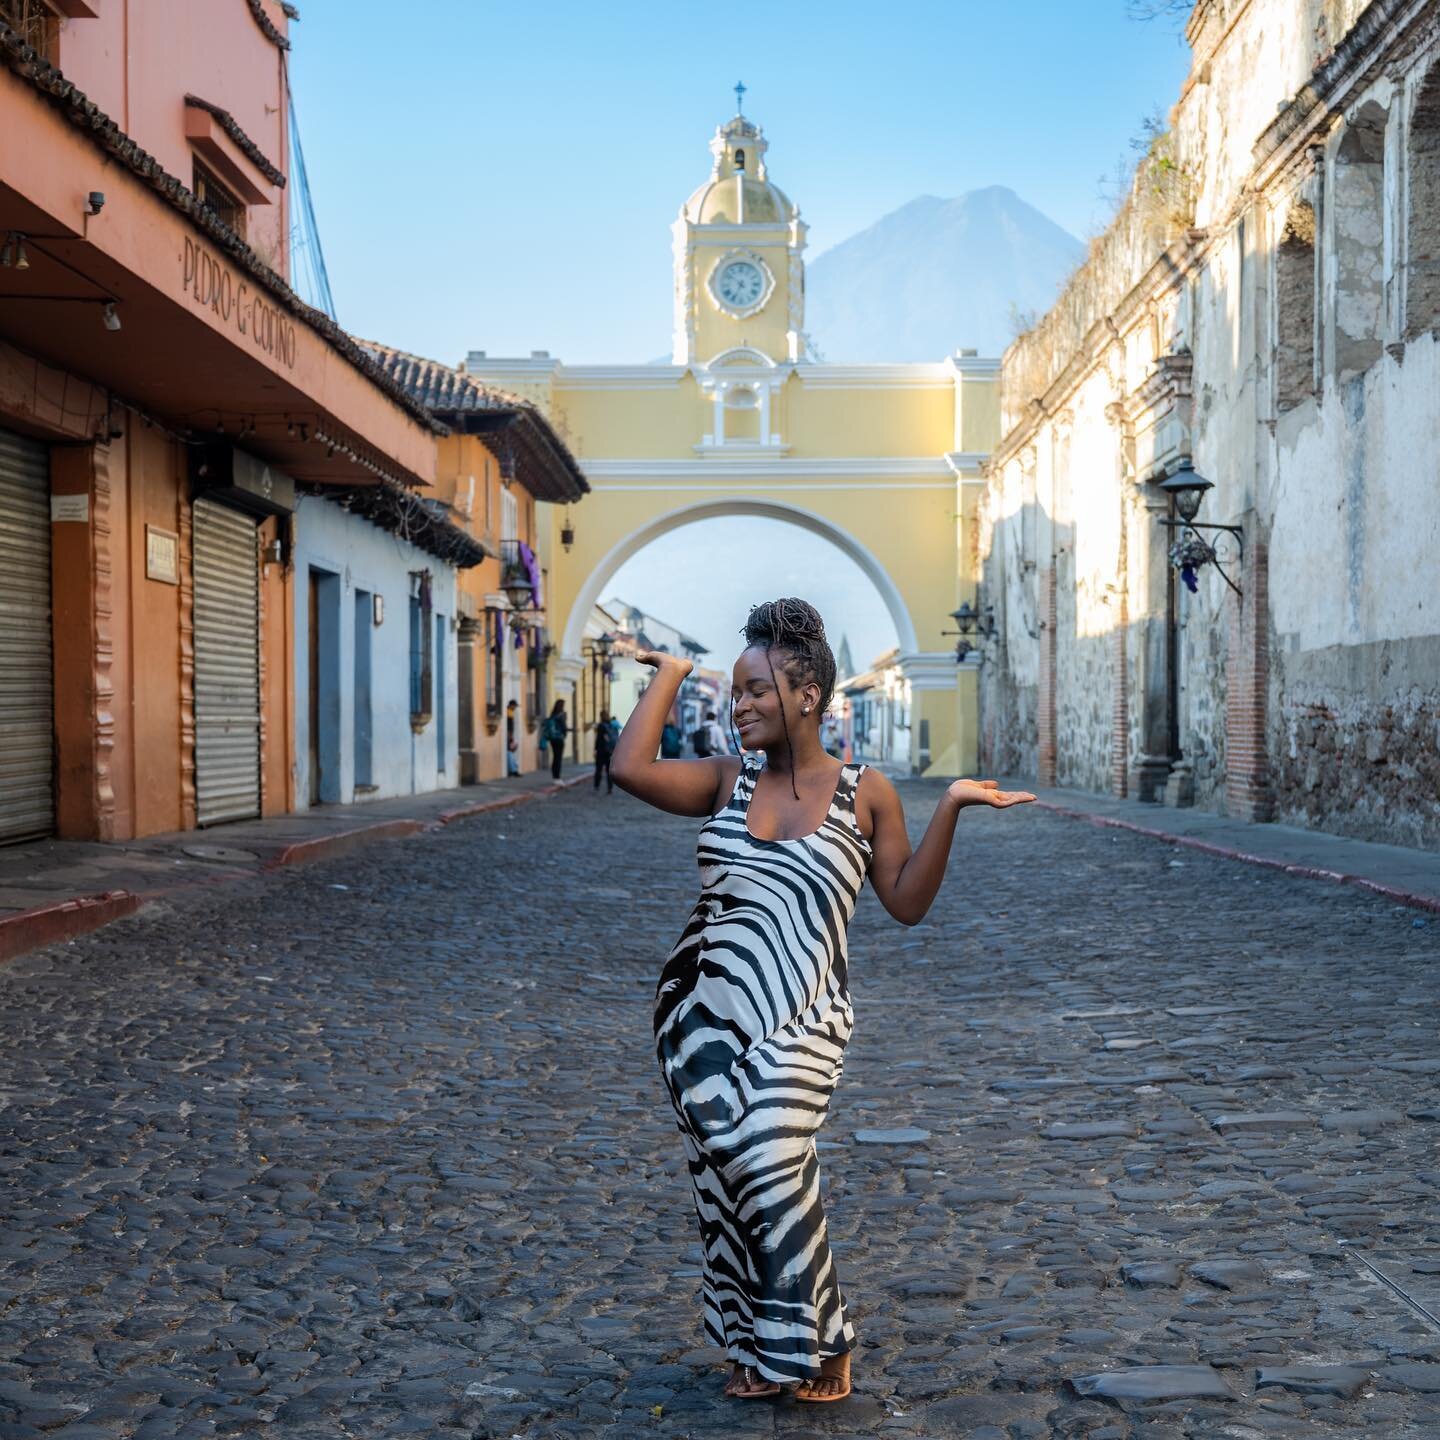 Another amazing lifestyle/travel photoshoot in Antigua Guatemala! 

It always pays off to do photoshoots as early in the morning as possible to capture the essence of this beautiful city through my lens. Stay tuned for more photos and stories from th